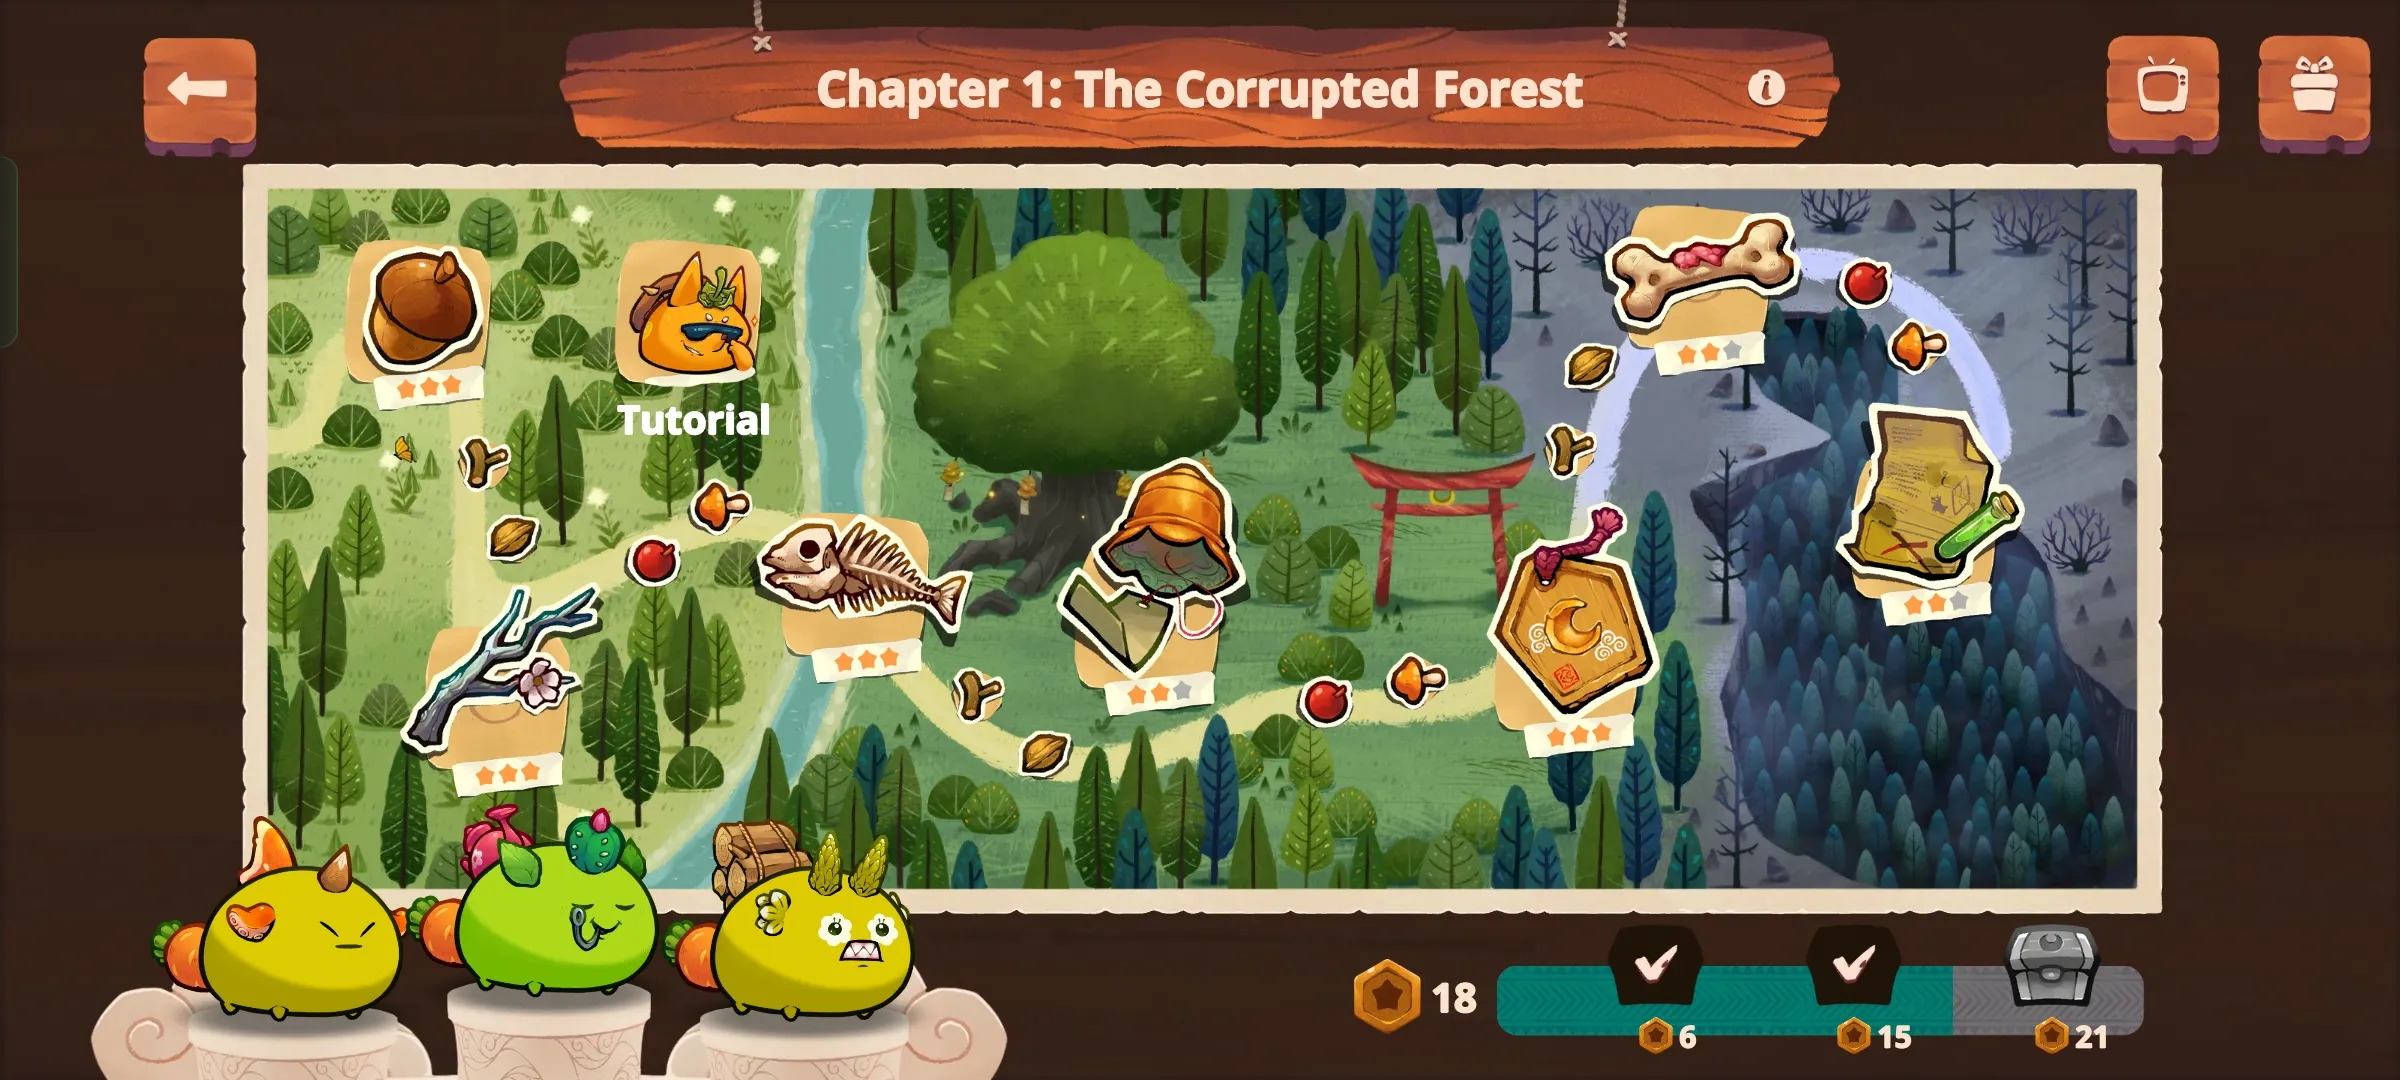 Axie Infinity Origins Adventure map shows a player's progress in the mode, including milestone progress and the foraging box, which collects XP and moonshards.